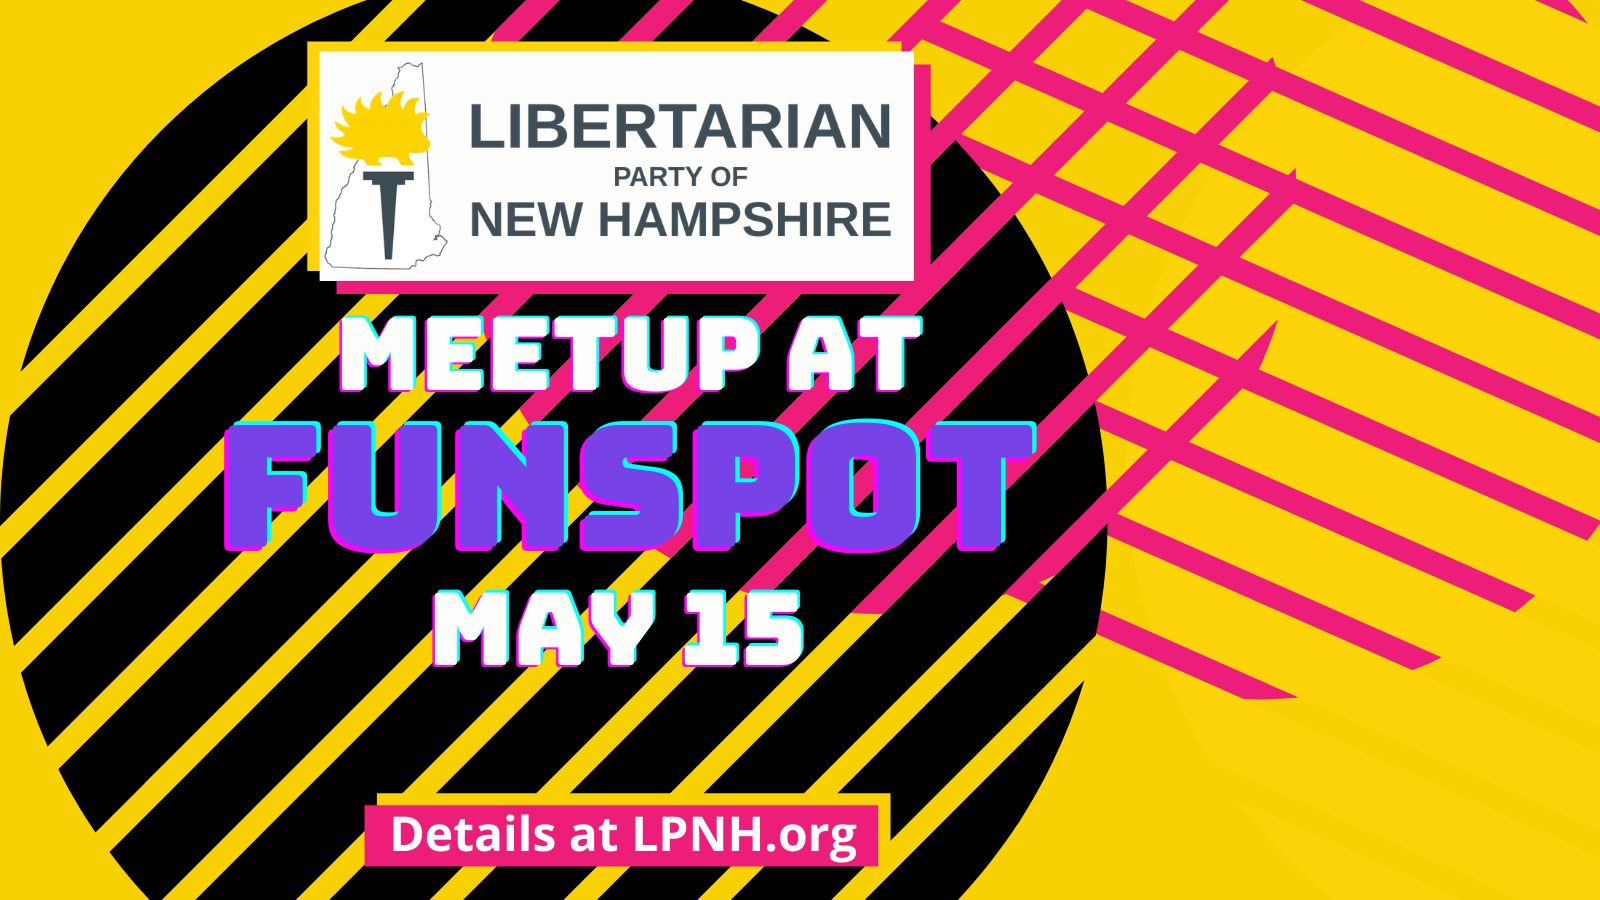 Libertarian Party of New Hampshire FunSpot